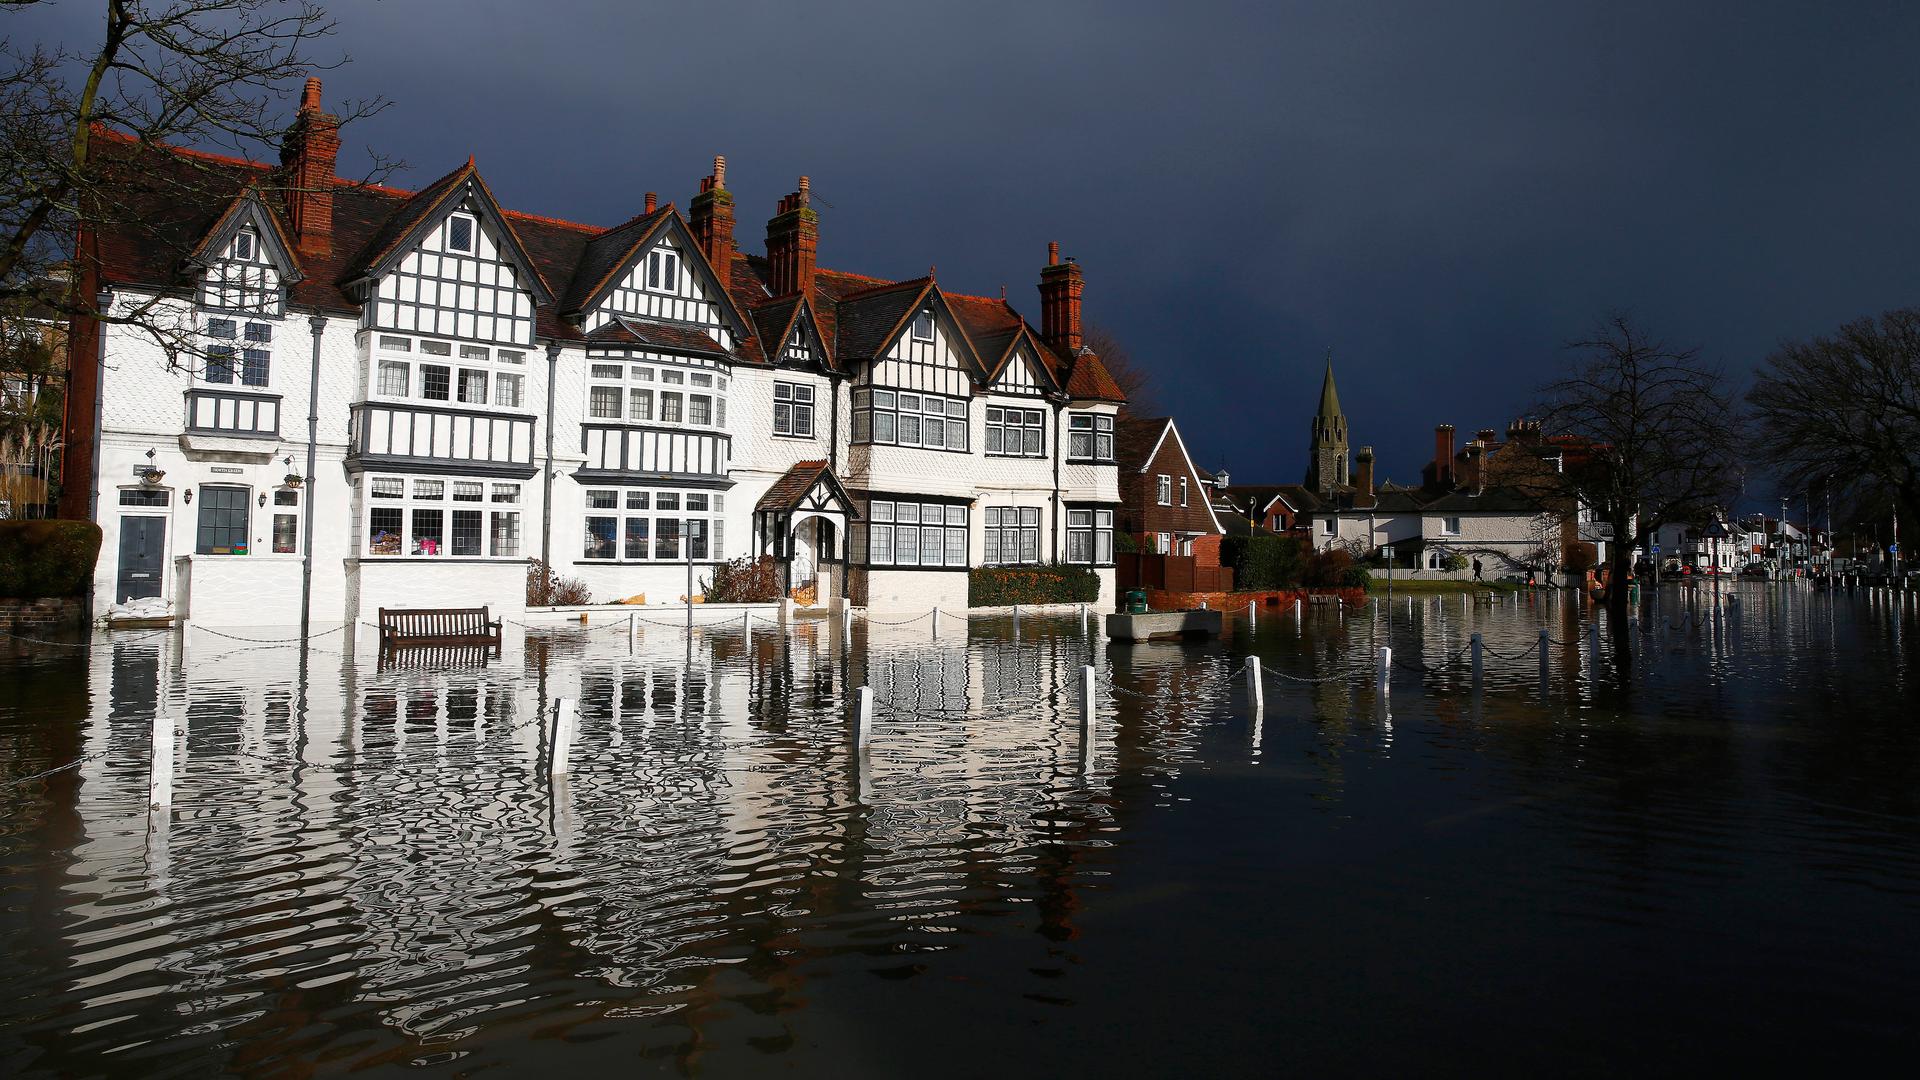 The river Thames floods the village of Datchet, southern England February 10, 2014. The British Government's top climate science agency says this winter's unrelenting rain is likely due at least in part to climate change.